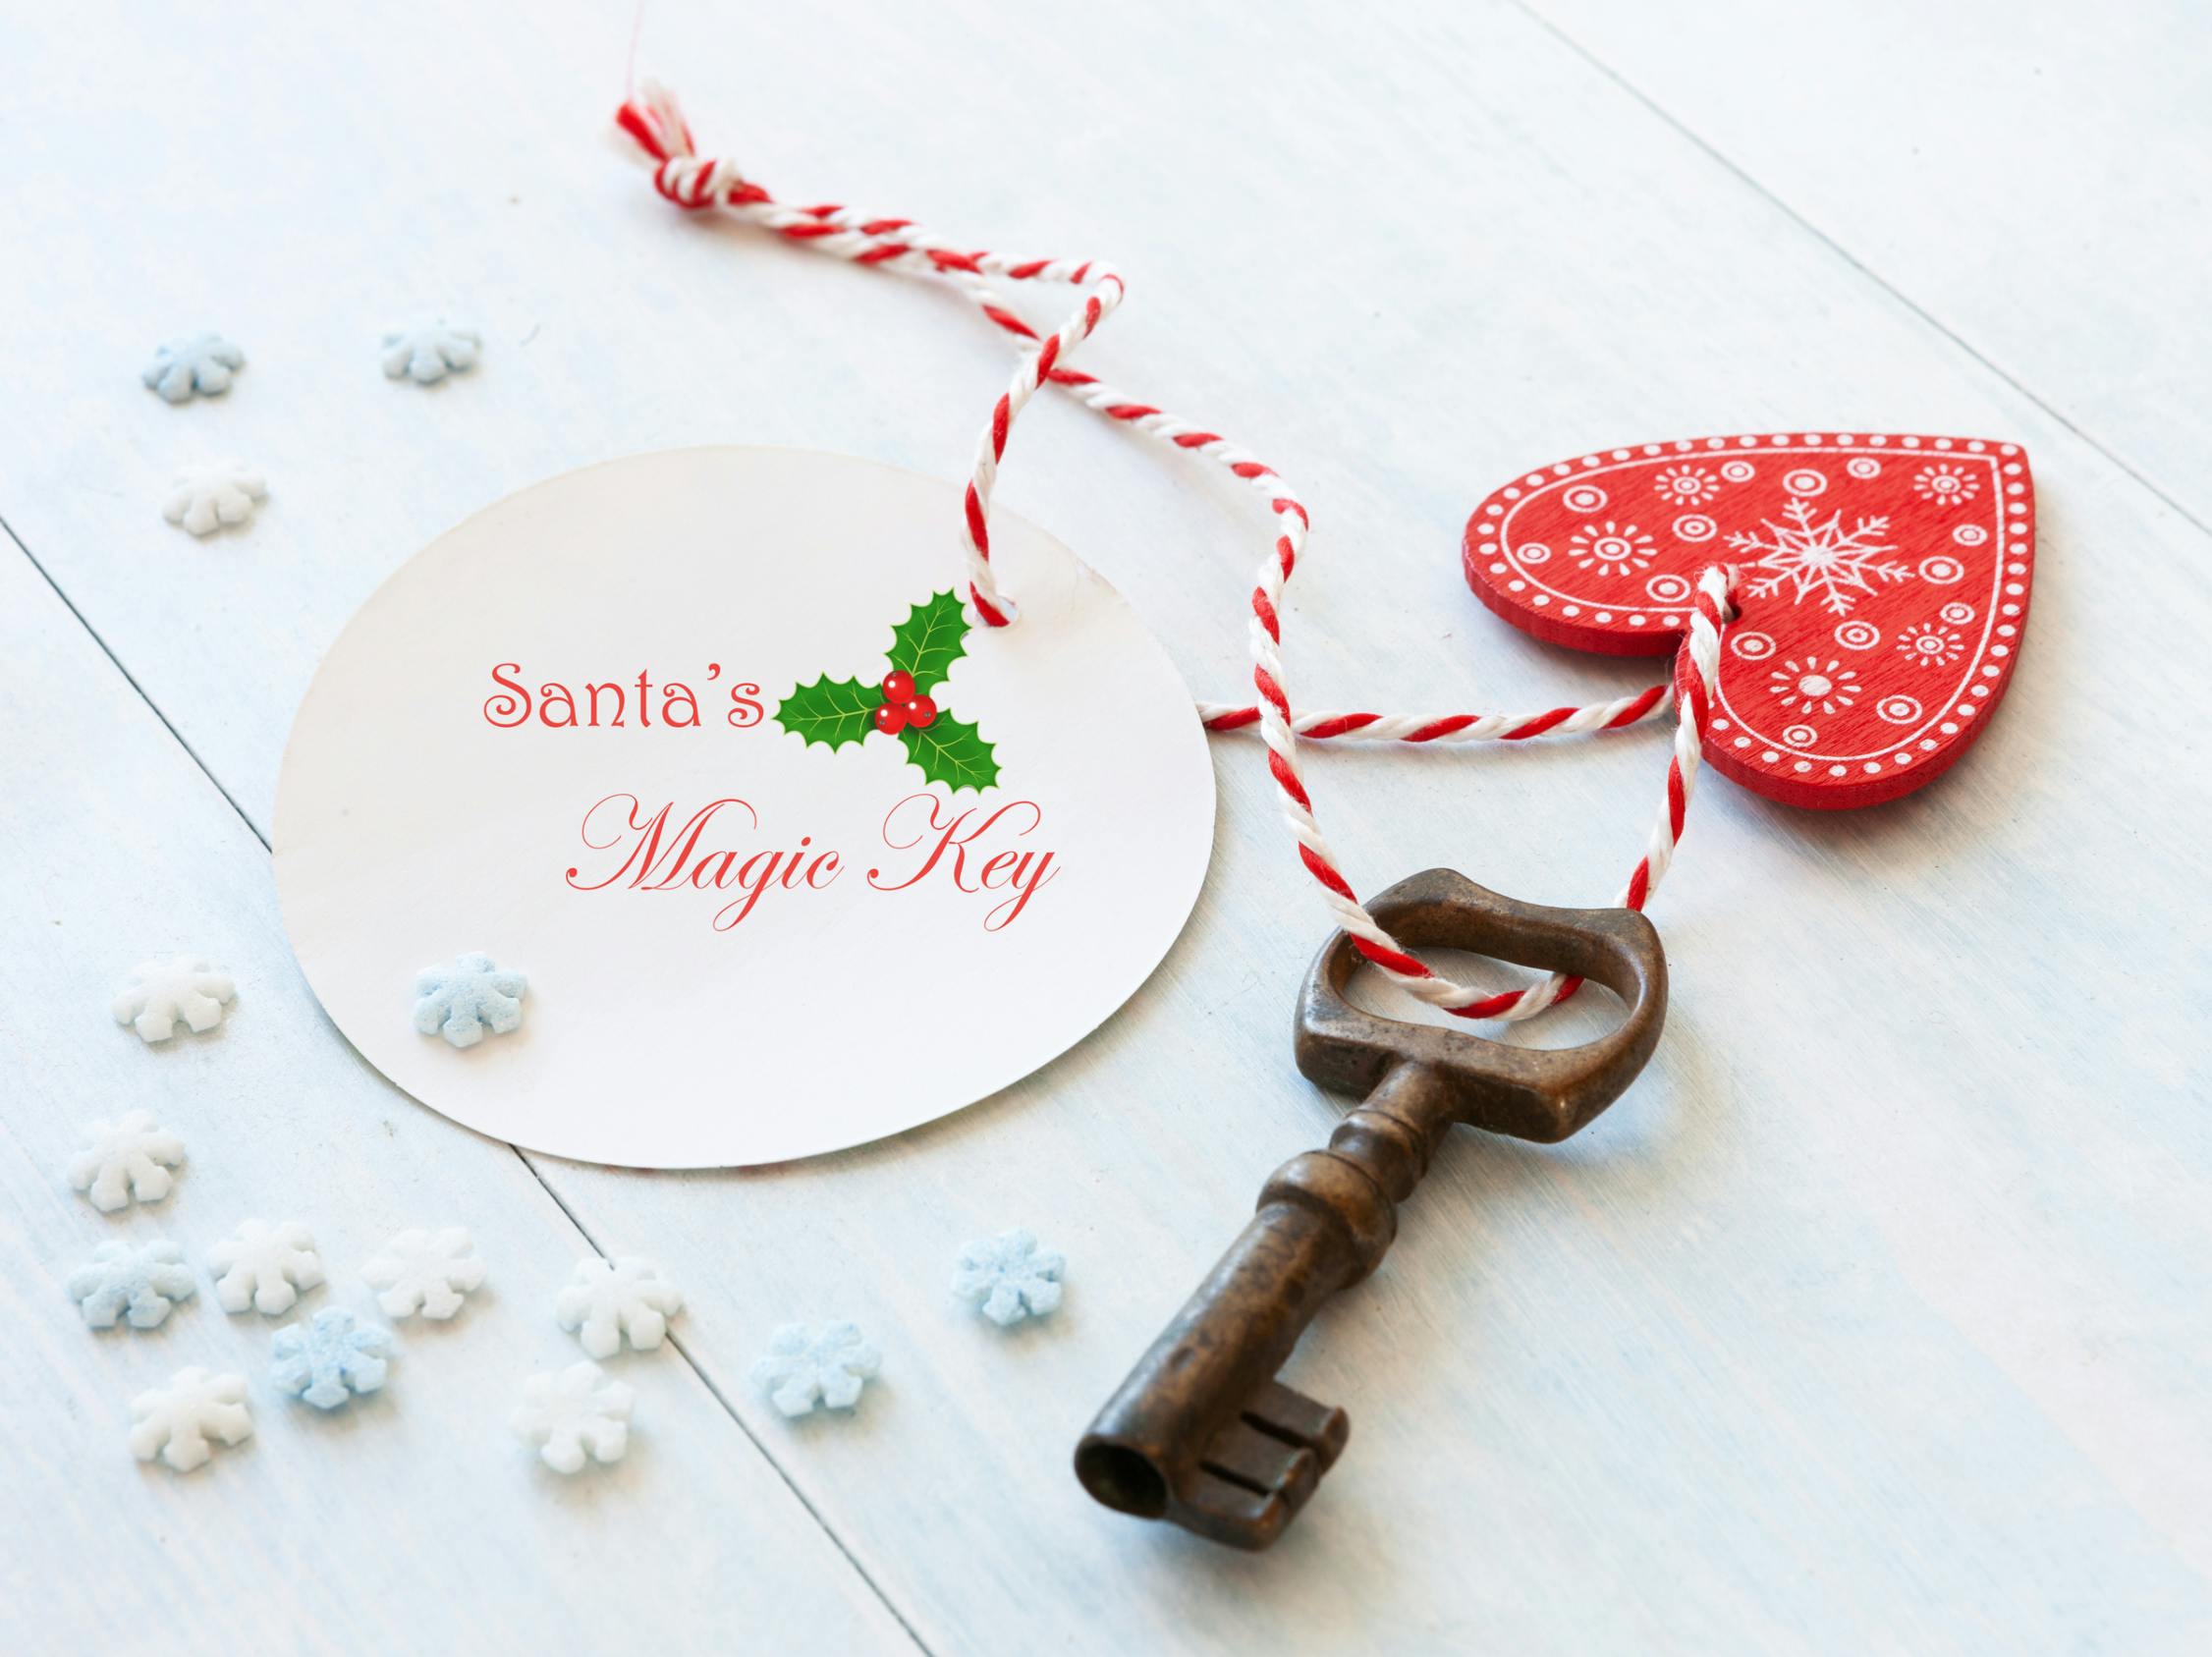 An old-fashioned key with a tag that says "Santa's Magic Key